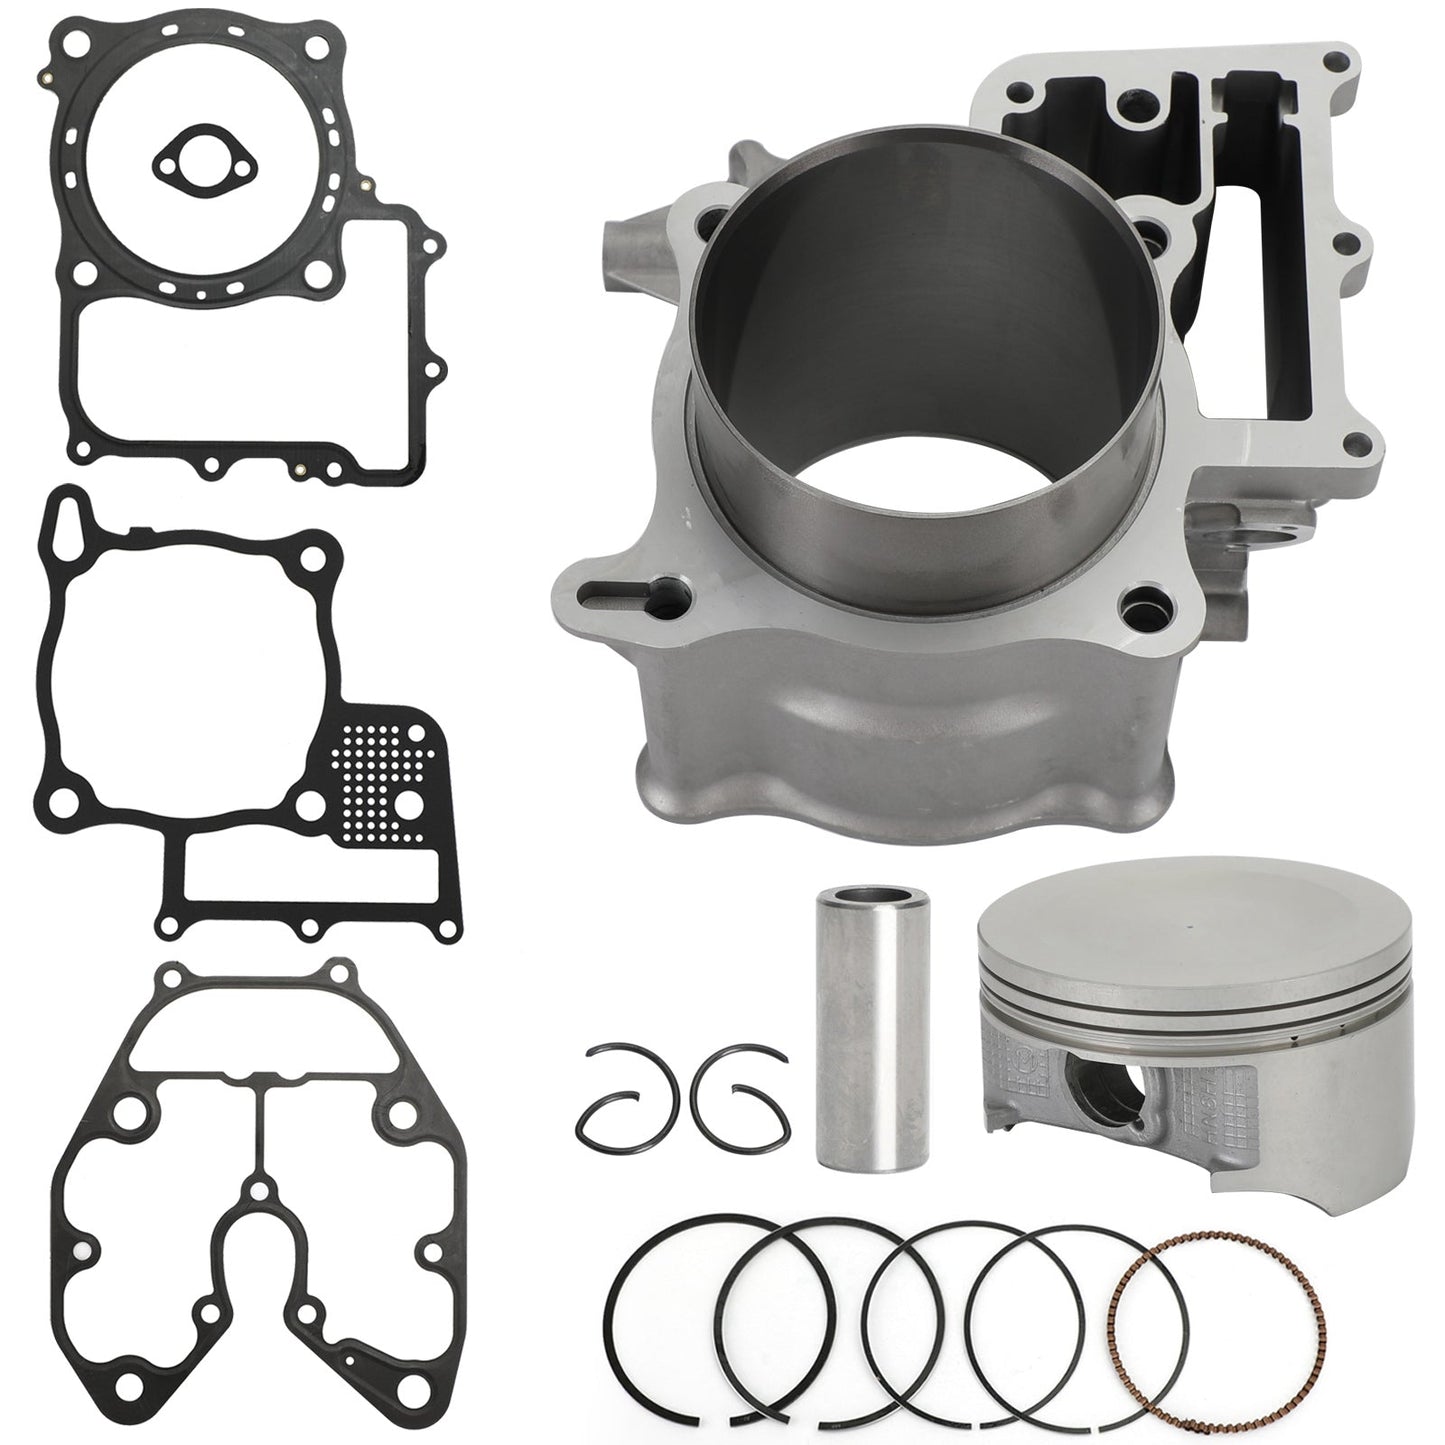 Cylinder Piston Top End Kit For Honda 14-21 SXS700 SXS 700 Pioneer 12100-HN8-A60